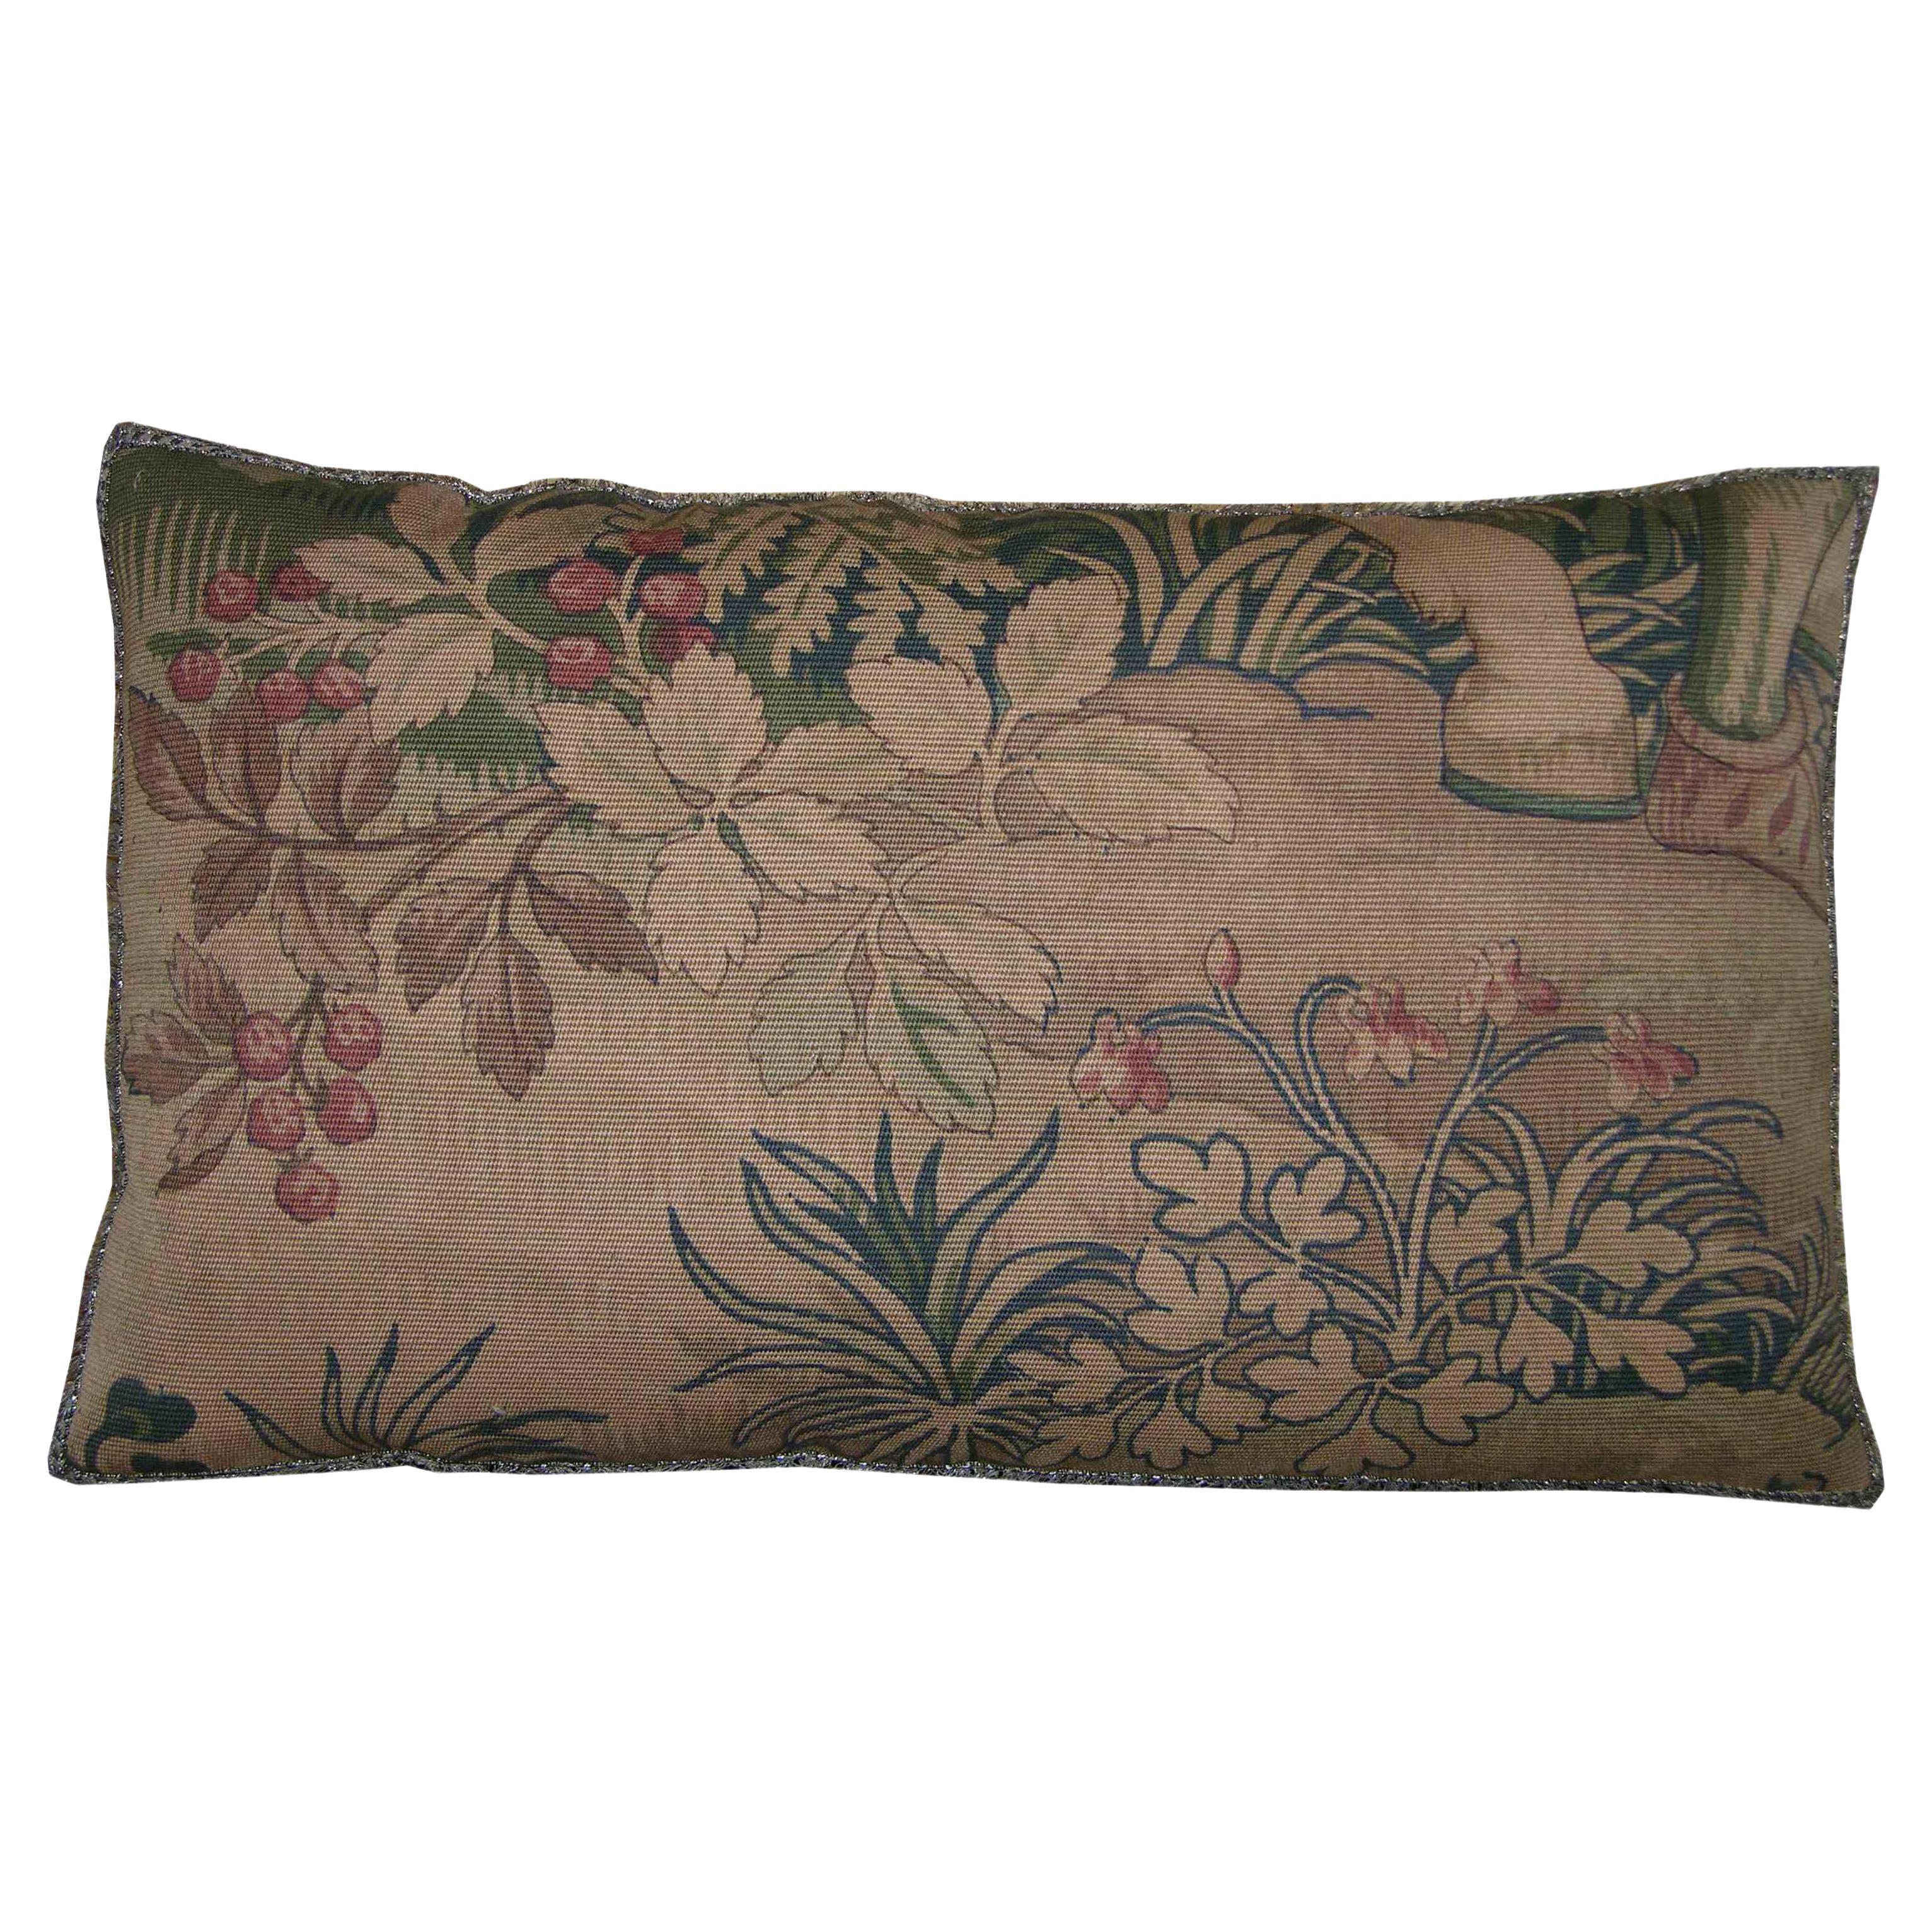 Circa 1920s Vintage Cartoon Tapestry Pillow For Sale